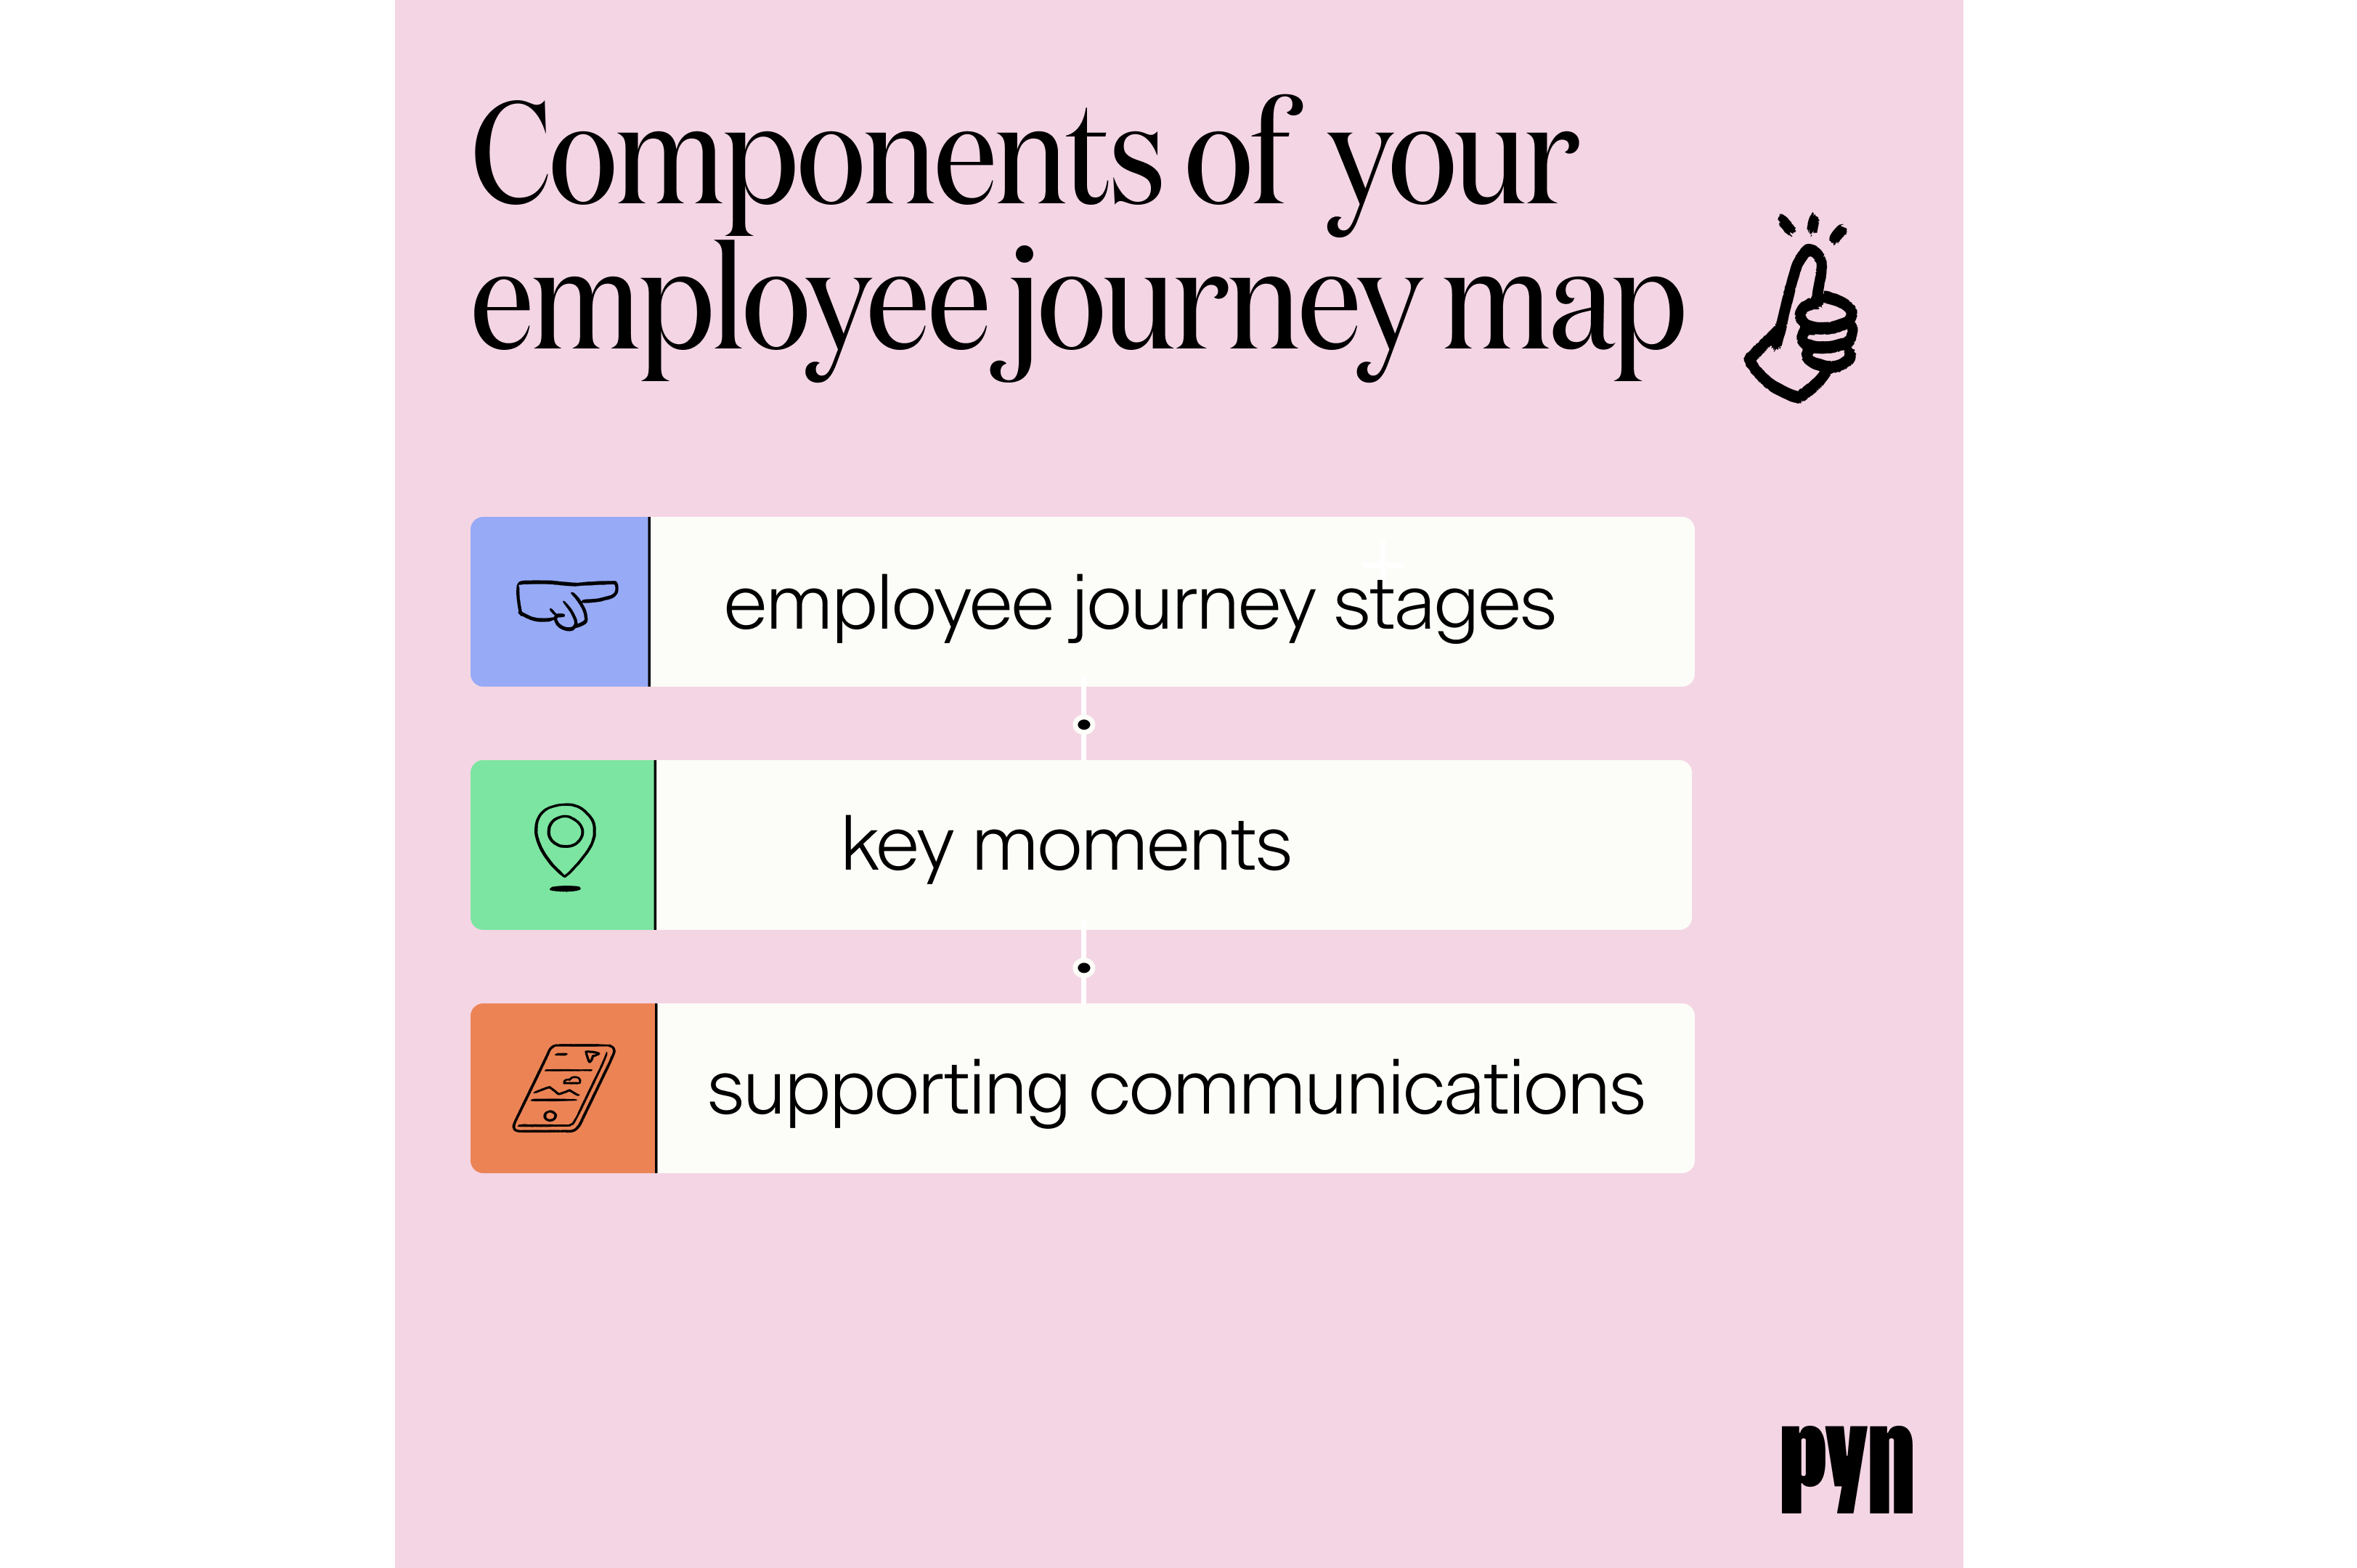 employee experience journey mapping pdf